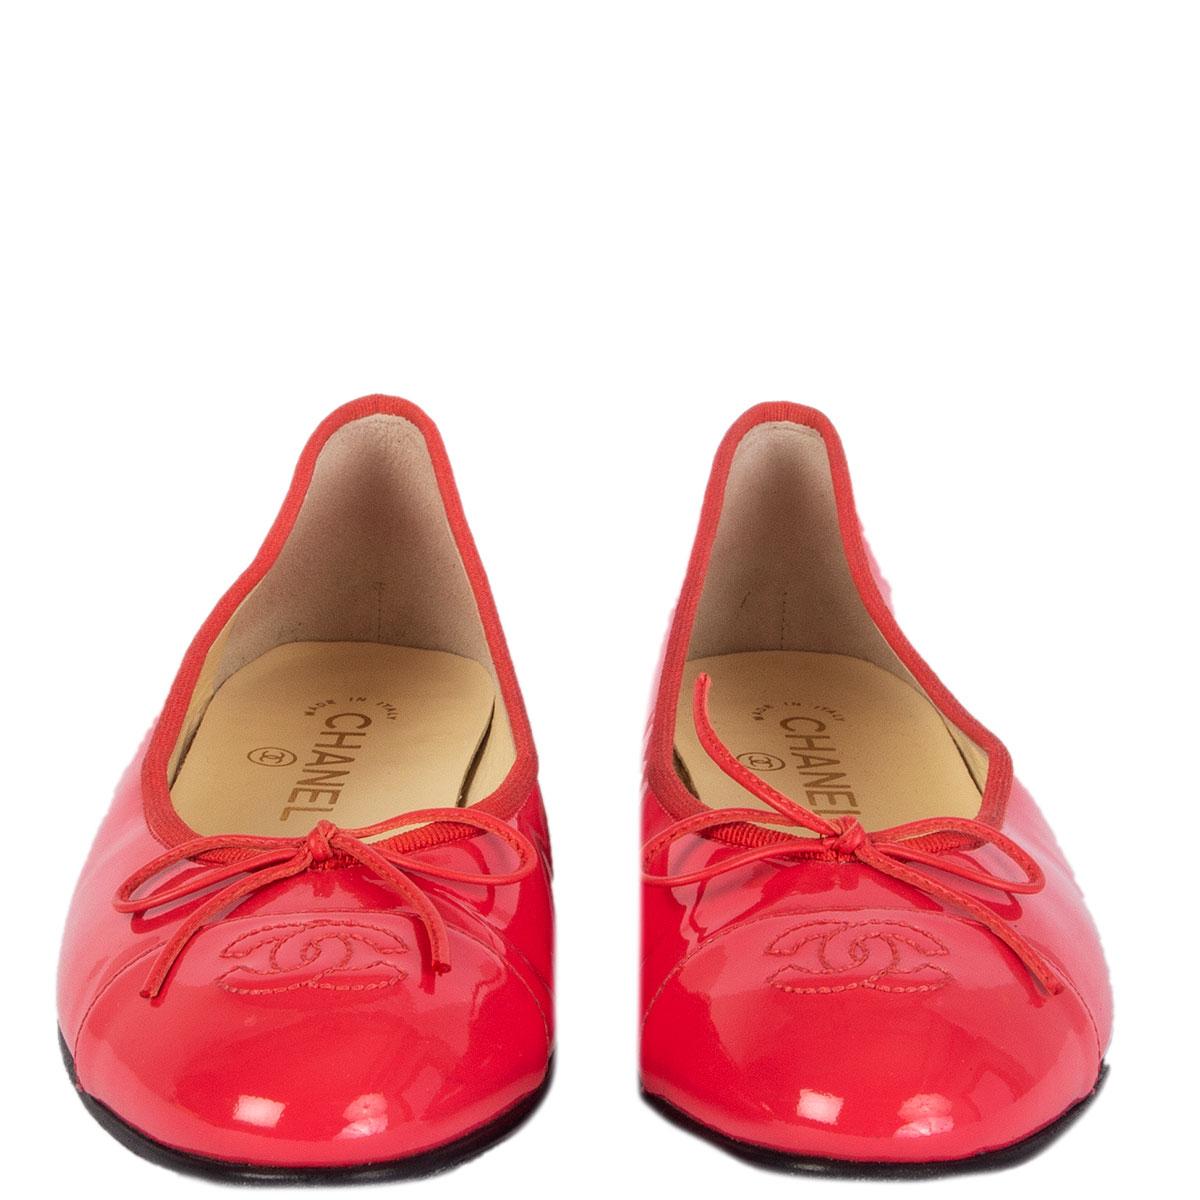 100% authentic Chanel classic ballet flats in pink patent leather. Have been worn with two very faint dark marks on the right shoes tip and on the left shoes back. Overall in excellent condition. 

Imprinted Size 39
Shoe Size 39
Inside Sole 25.3cm